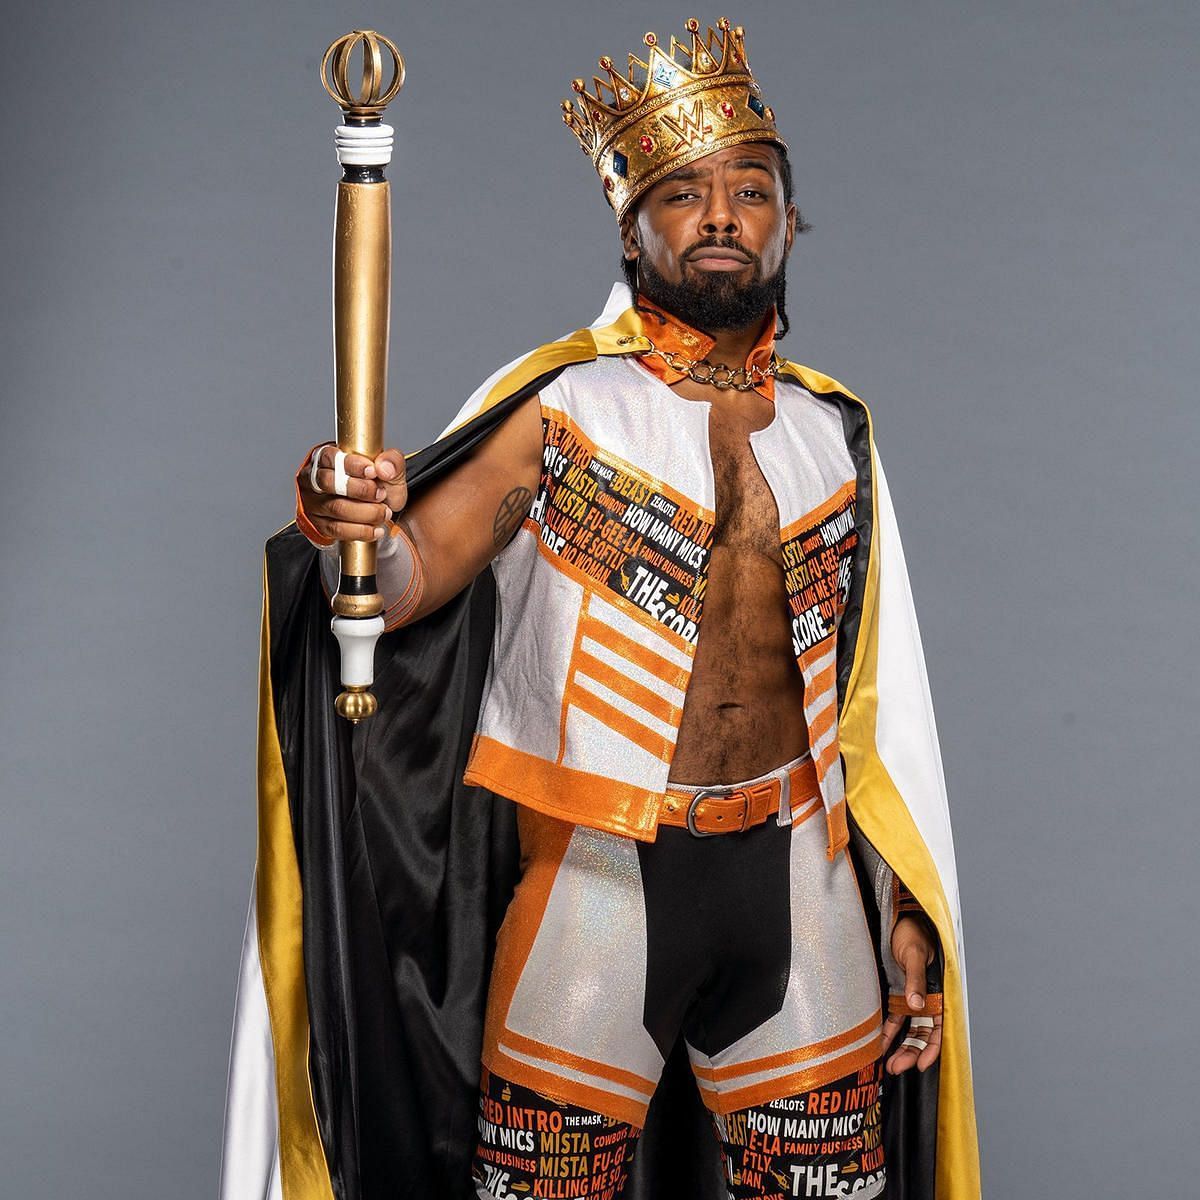 King Woods is the last person to win King of the Ring